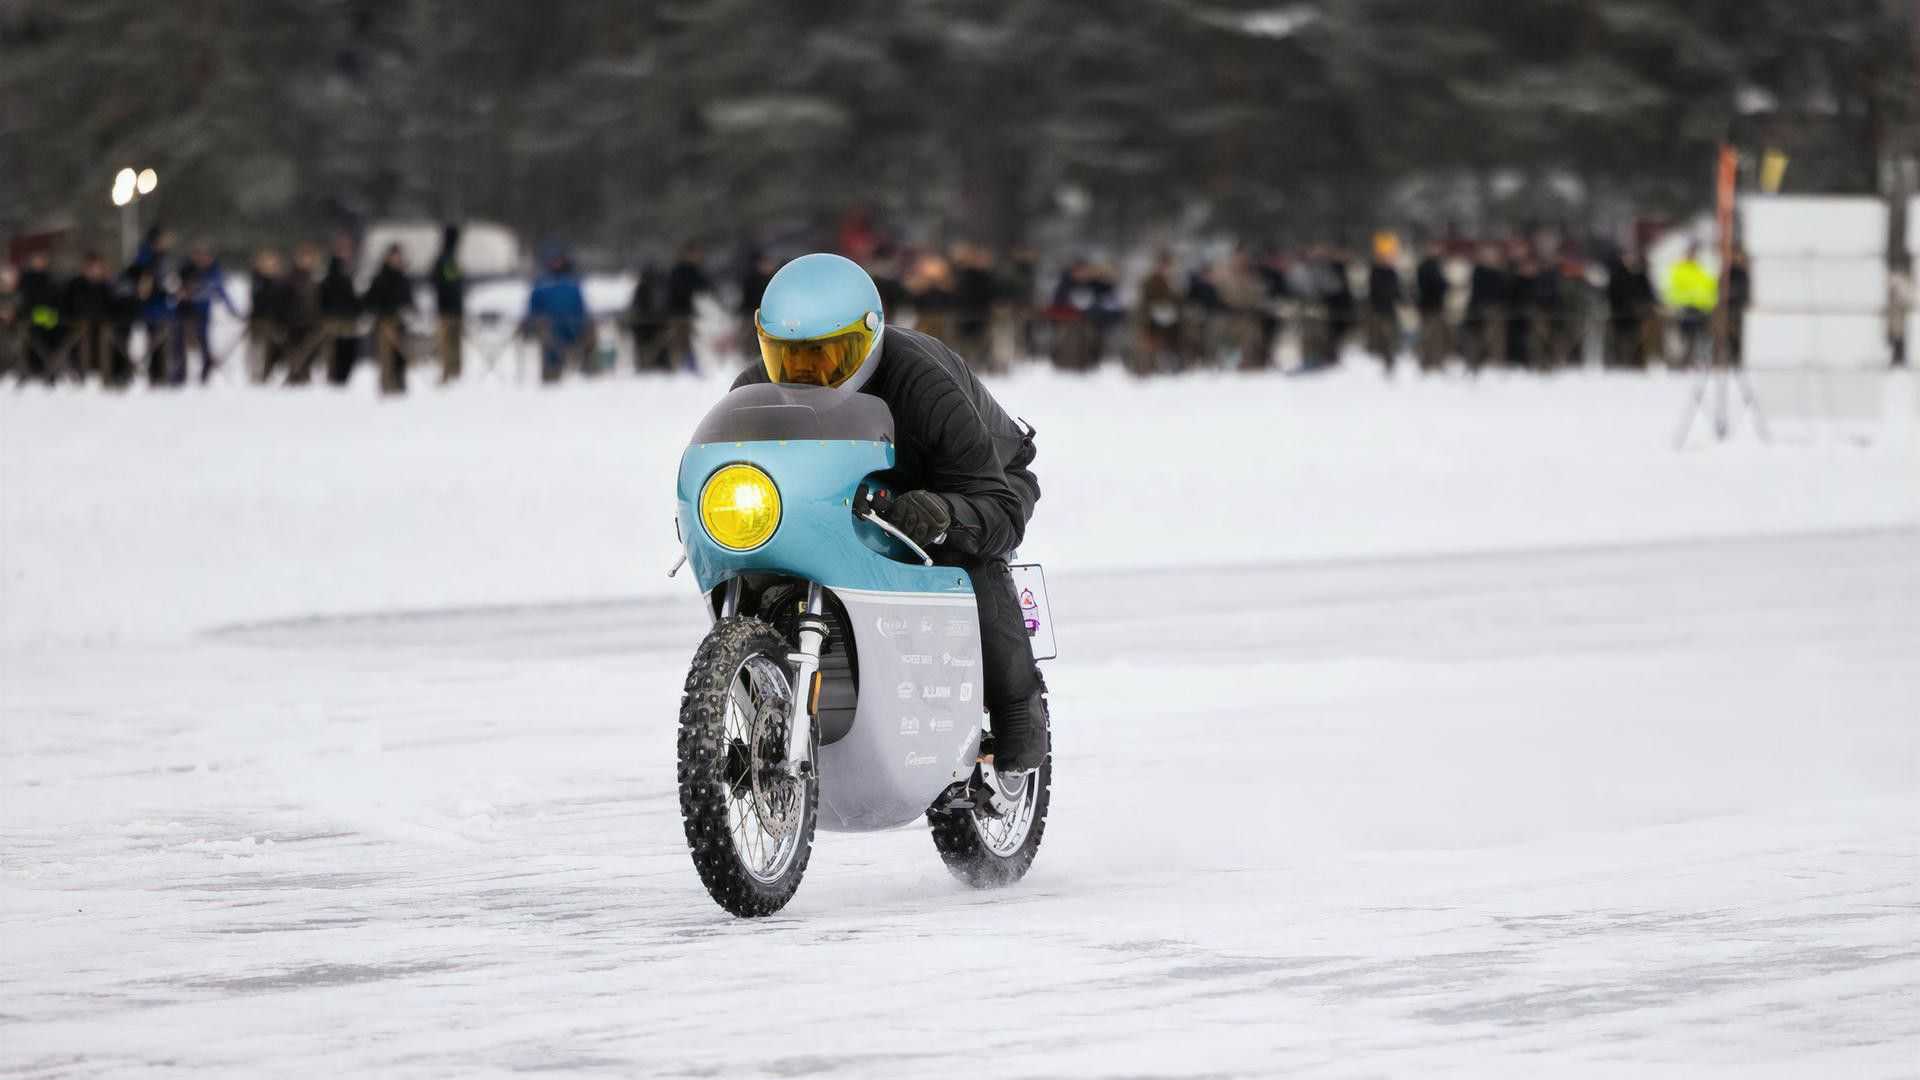 rgnt project aurora speed run 2 - RGNT Motorcycles Sets New Electric Speed Records on Ice